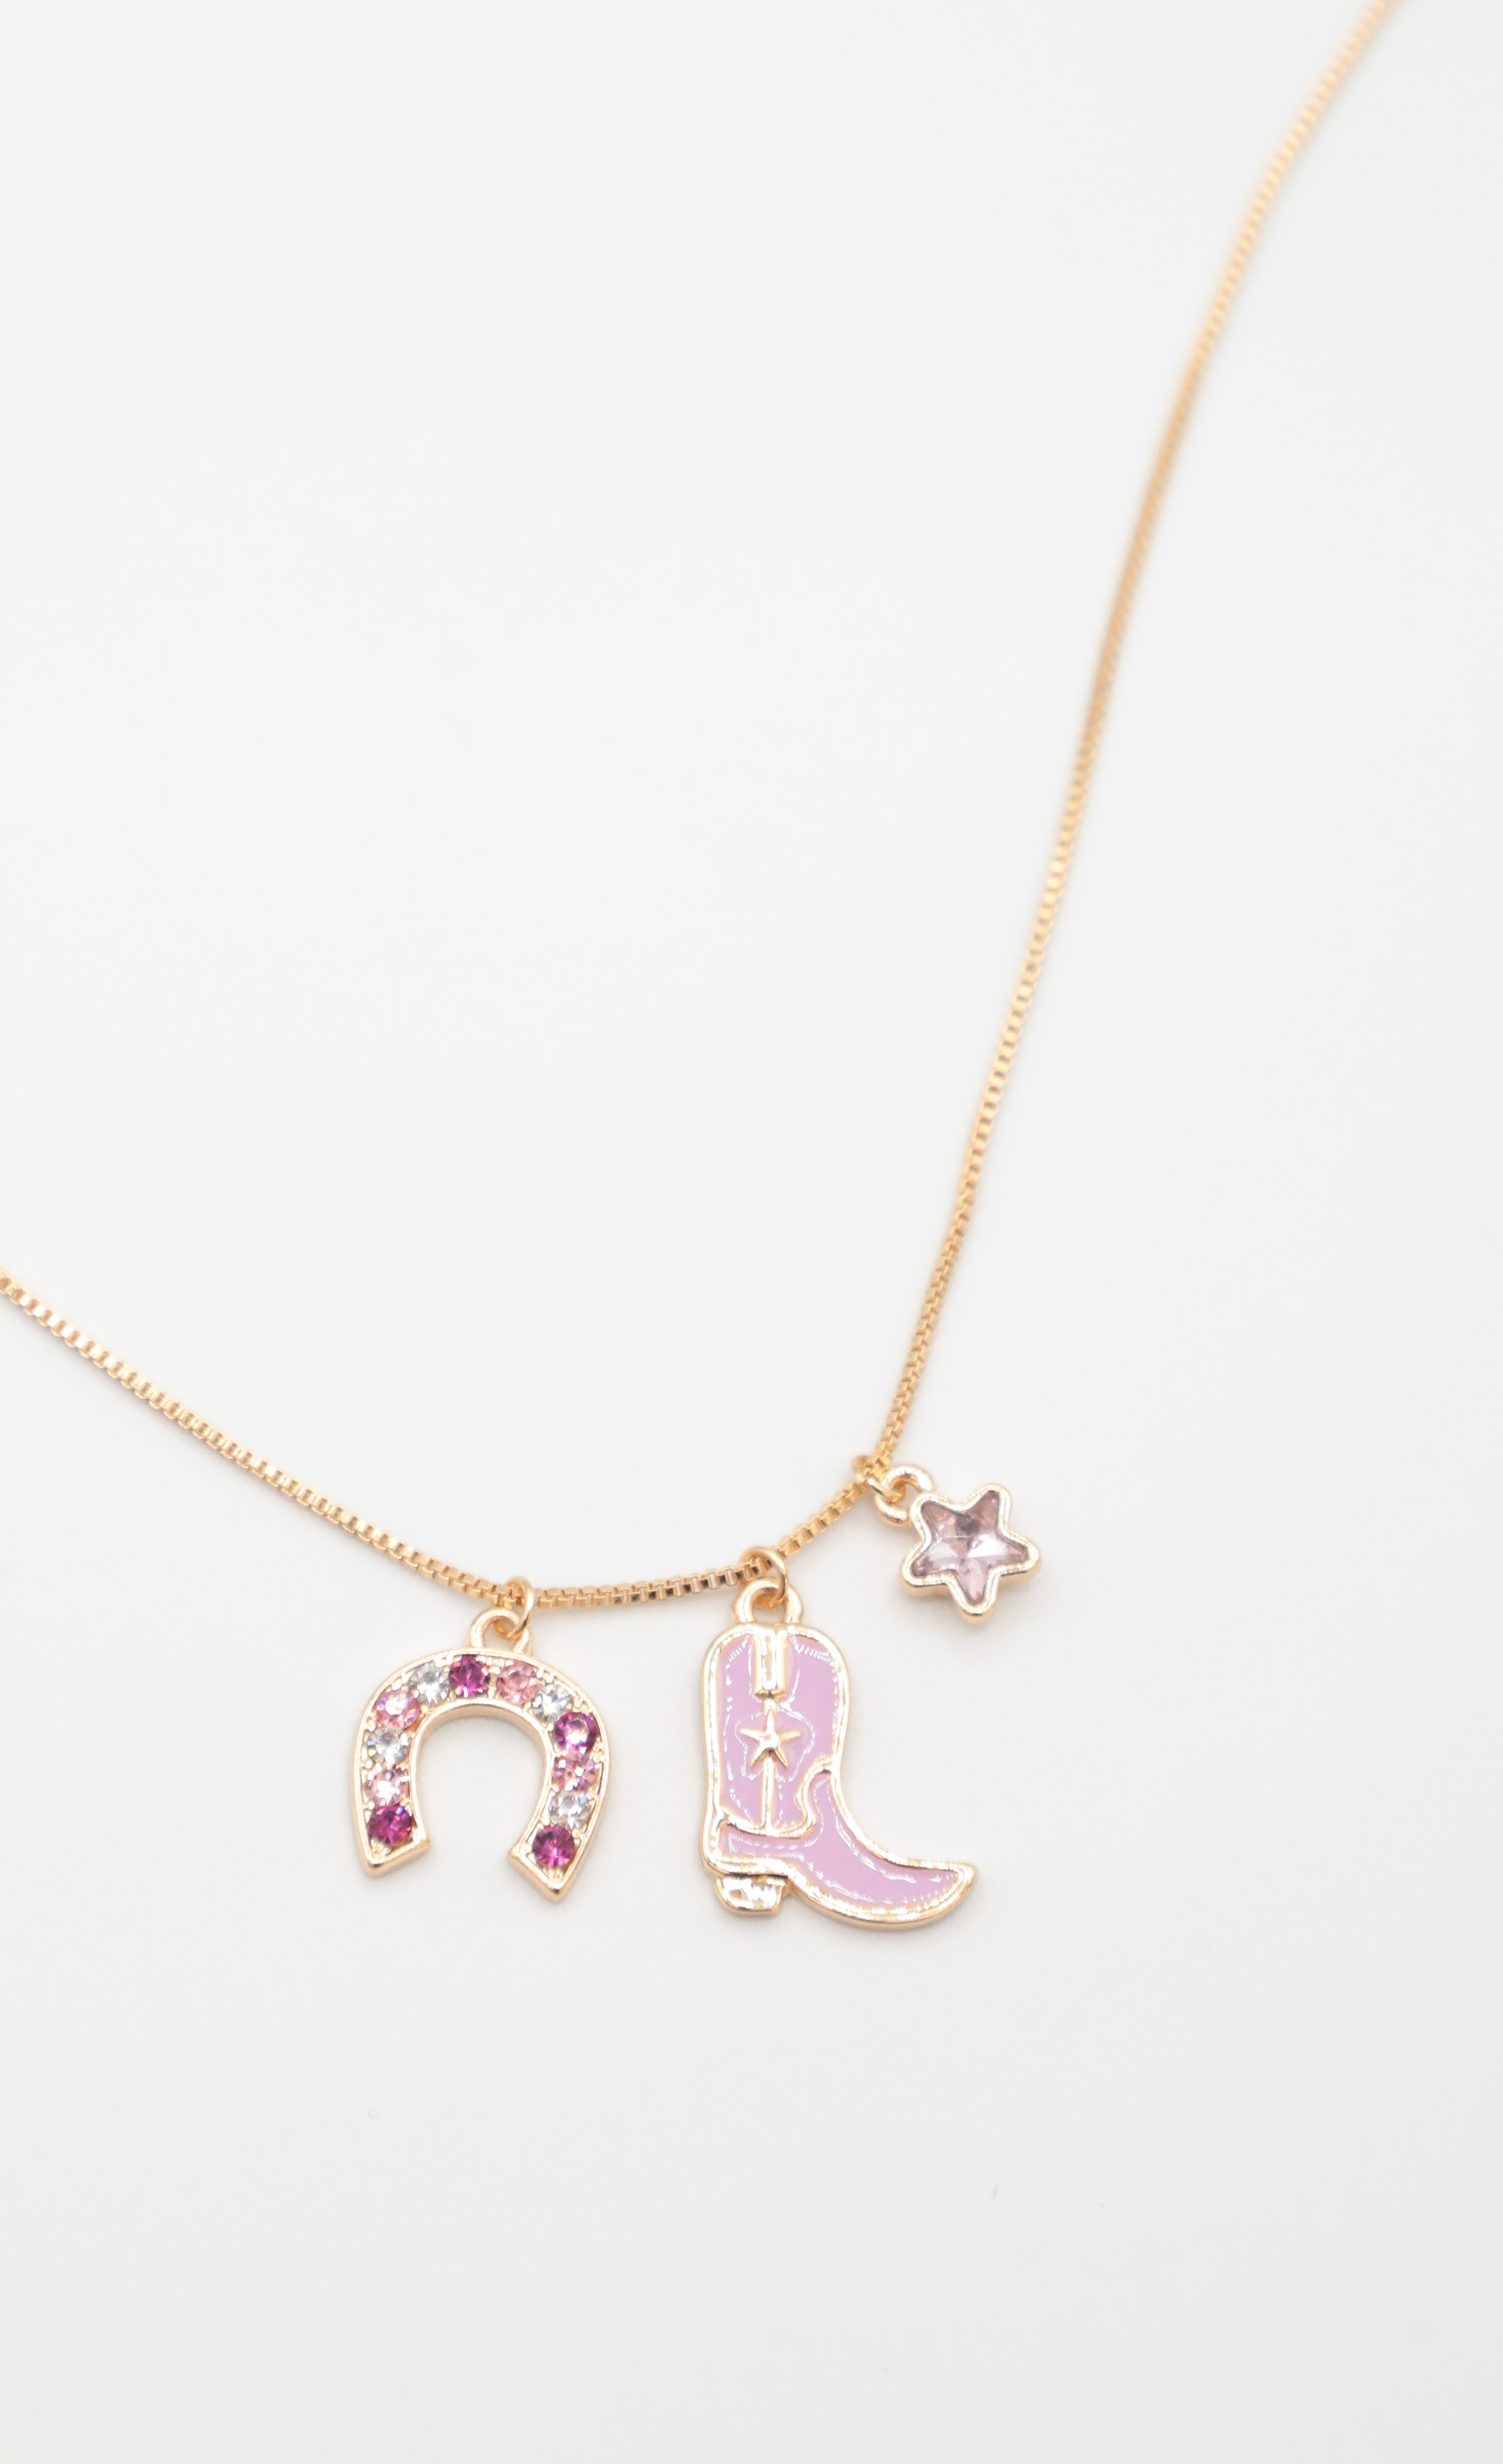 Take Me For A Ride Necklace in Gold